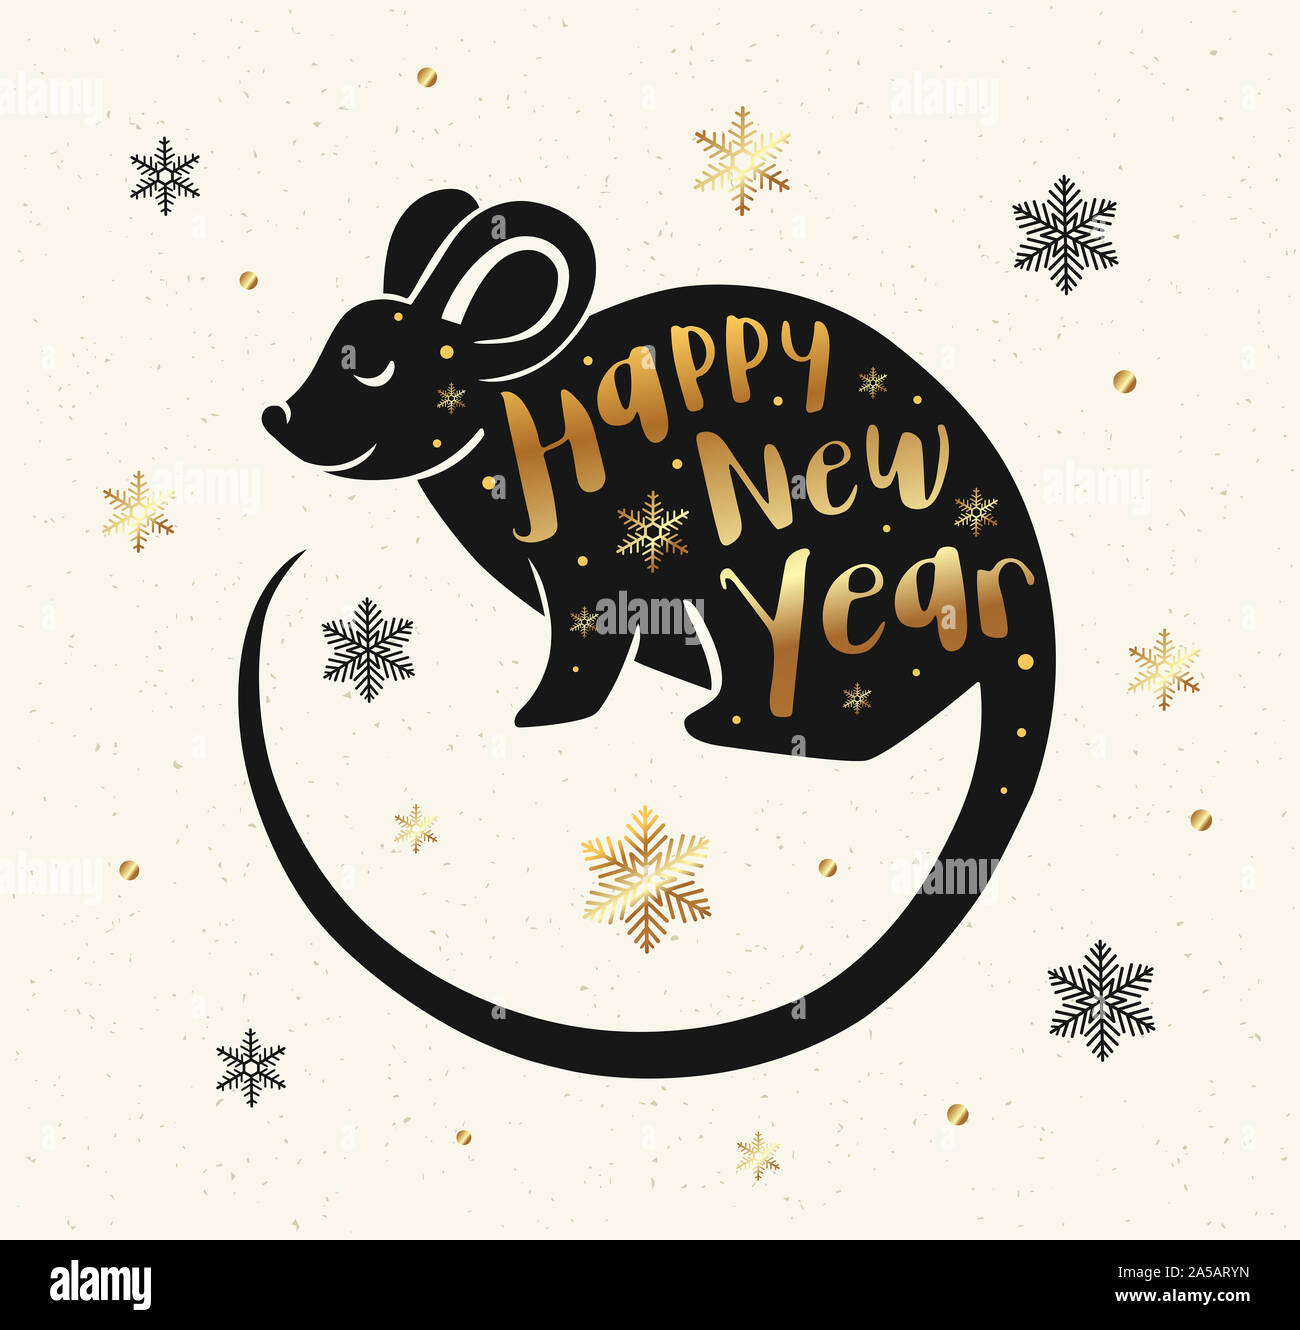 Cute rat symbol of Chinese zodiac for 2020 new year. Black silhouette of rat, golden snowflakes and lettering. Stock Photo